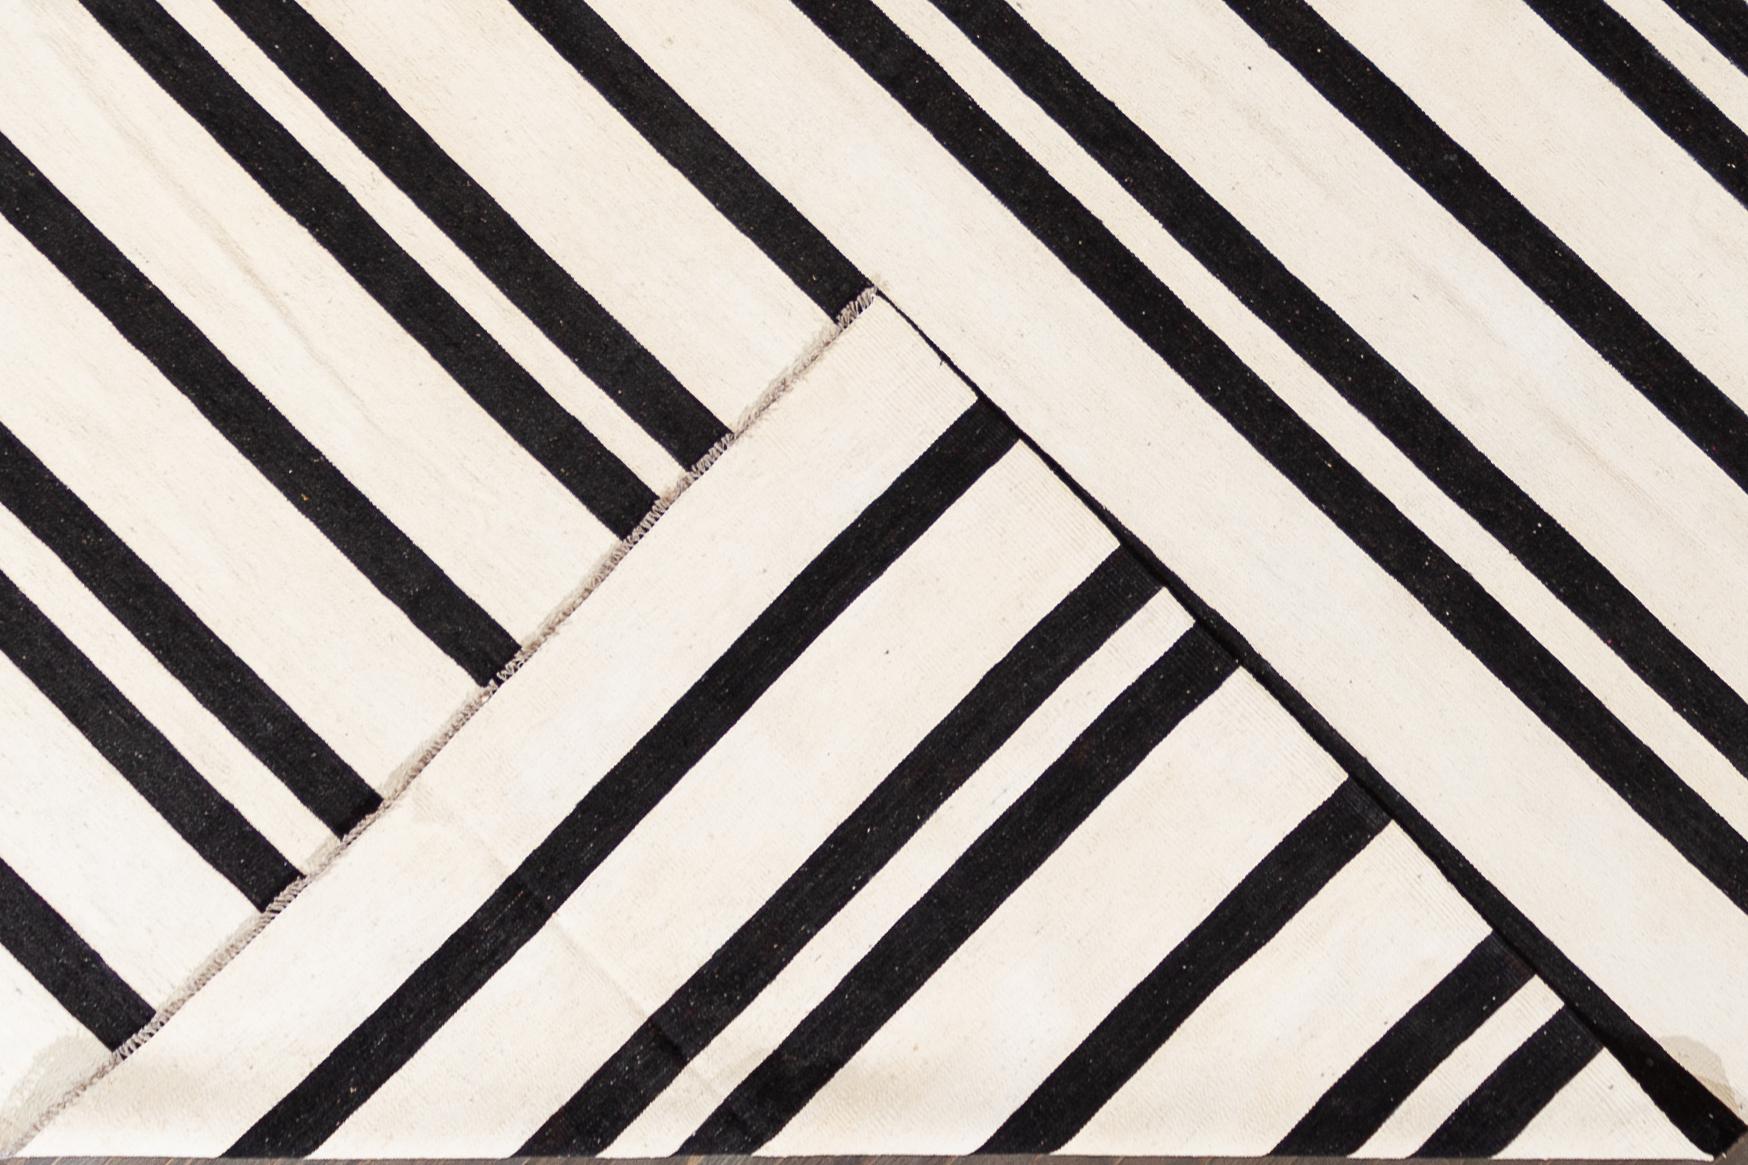 Beautiful 21st century contemporary Kilim rug, handwoven wool in an allover black and white striped design.

This rug measures 11' 8